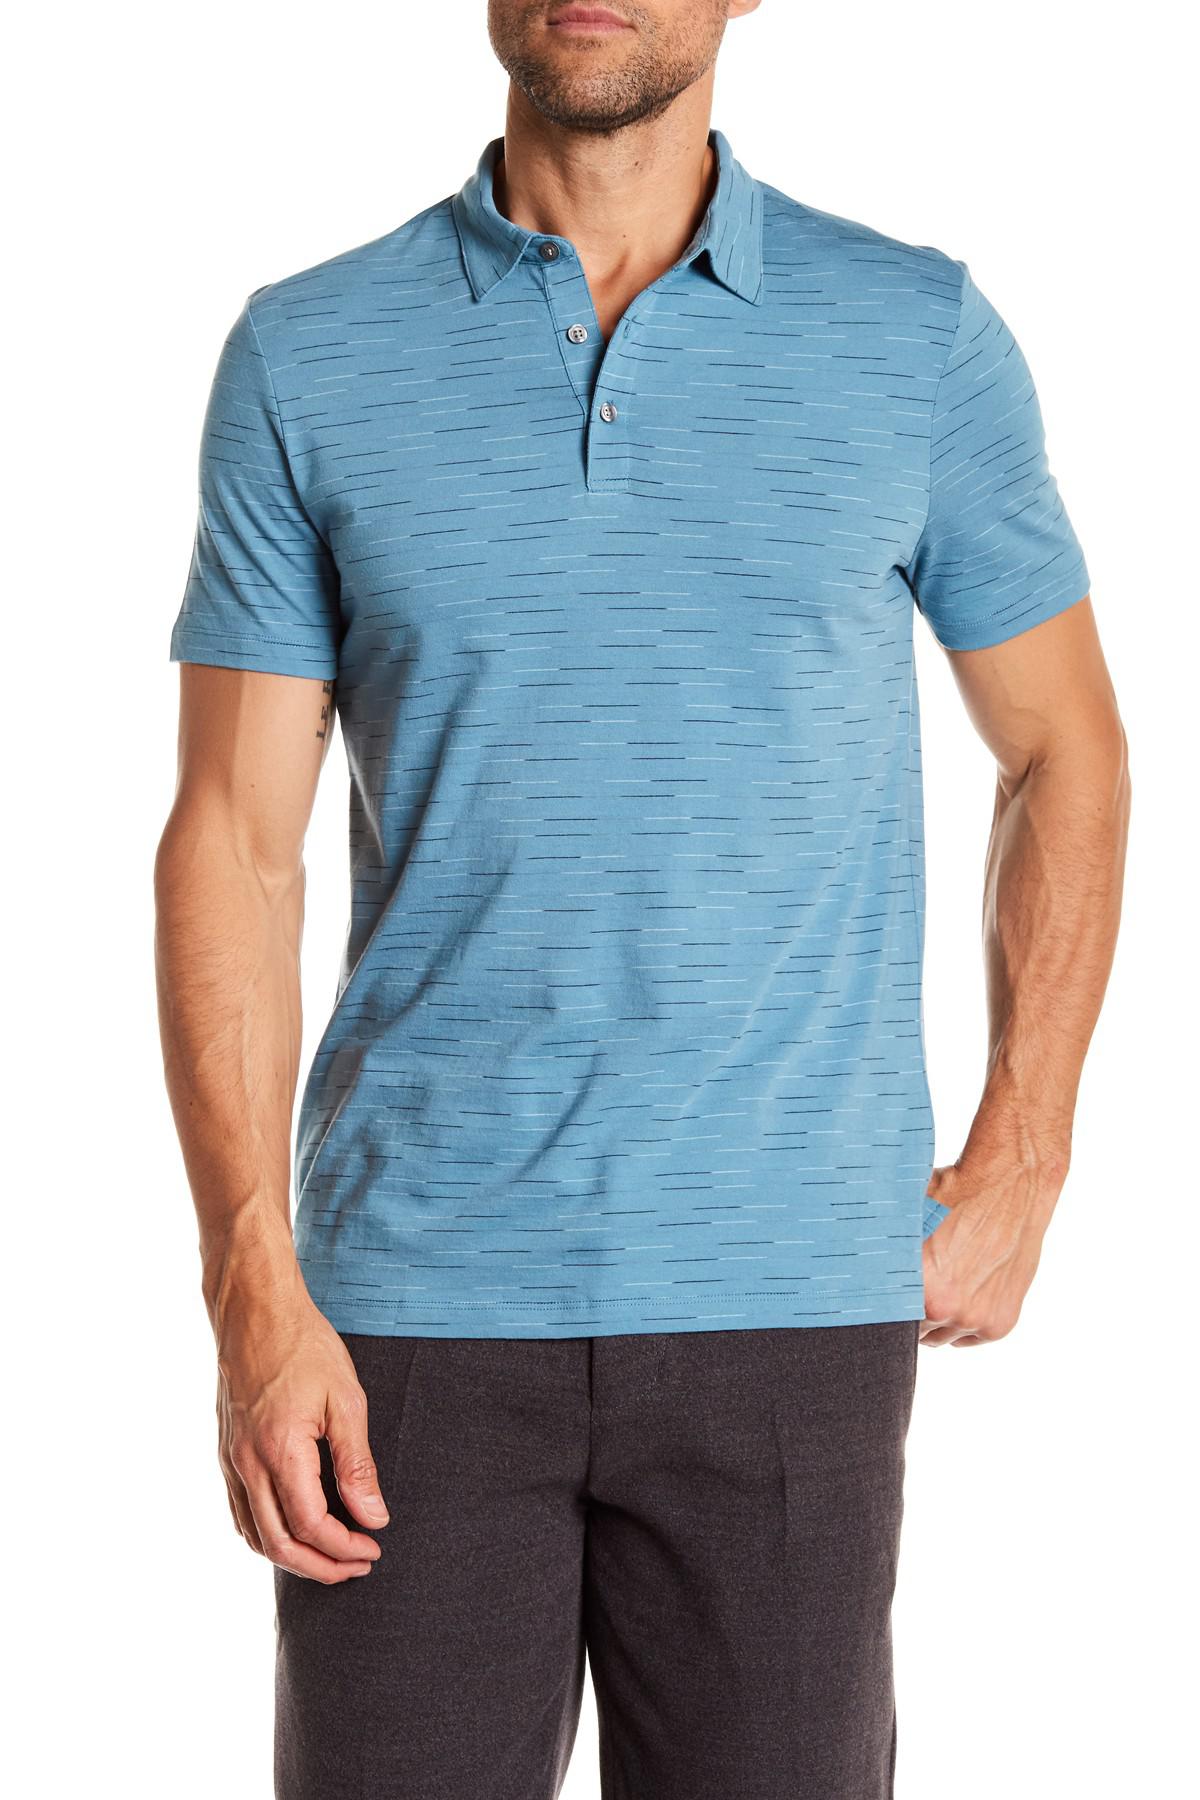 Lyst - Perry Ellis Cotton 3-button Polo Shirt in Blue for Men